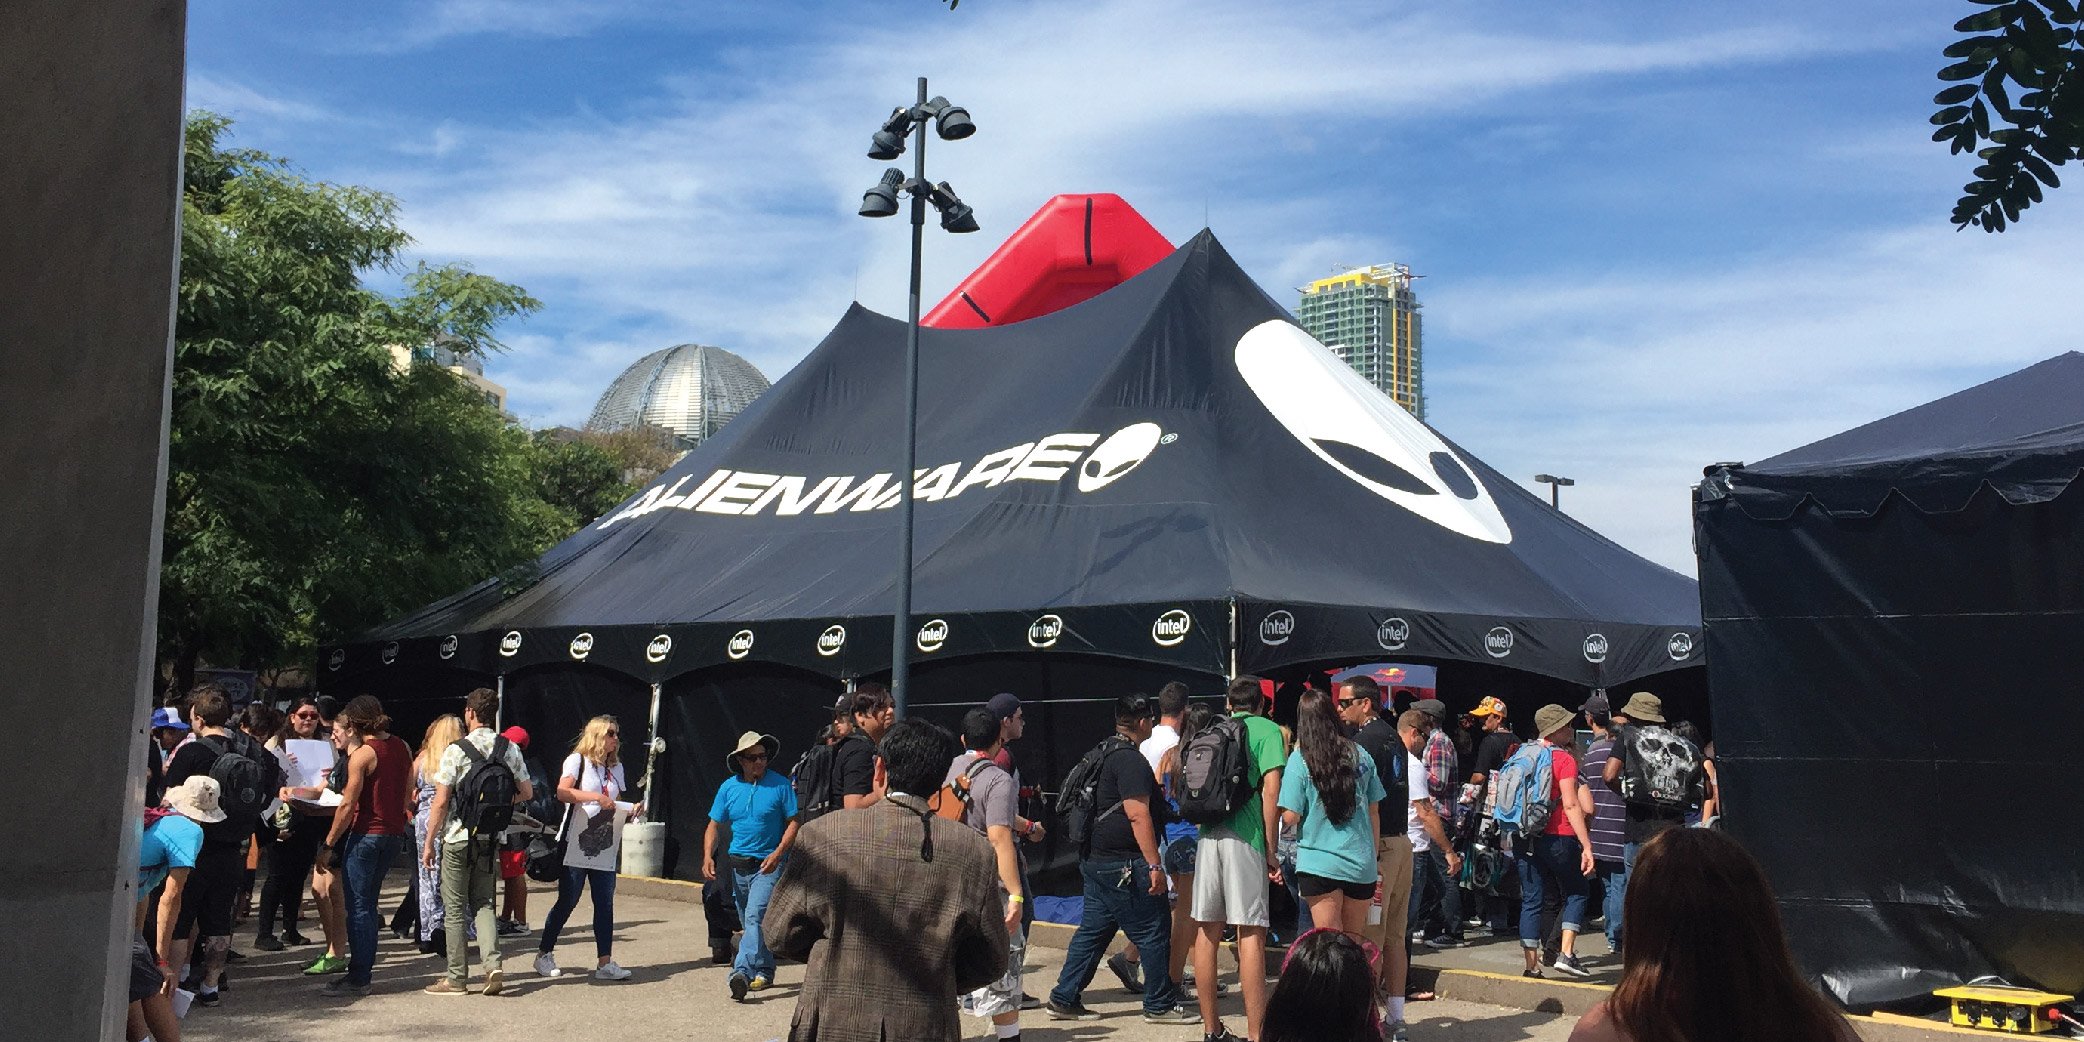 Alienware Custom Frame Tent at comic con with a many passerby